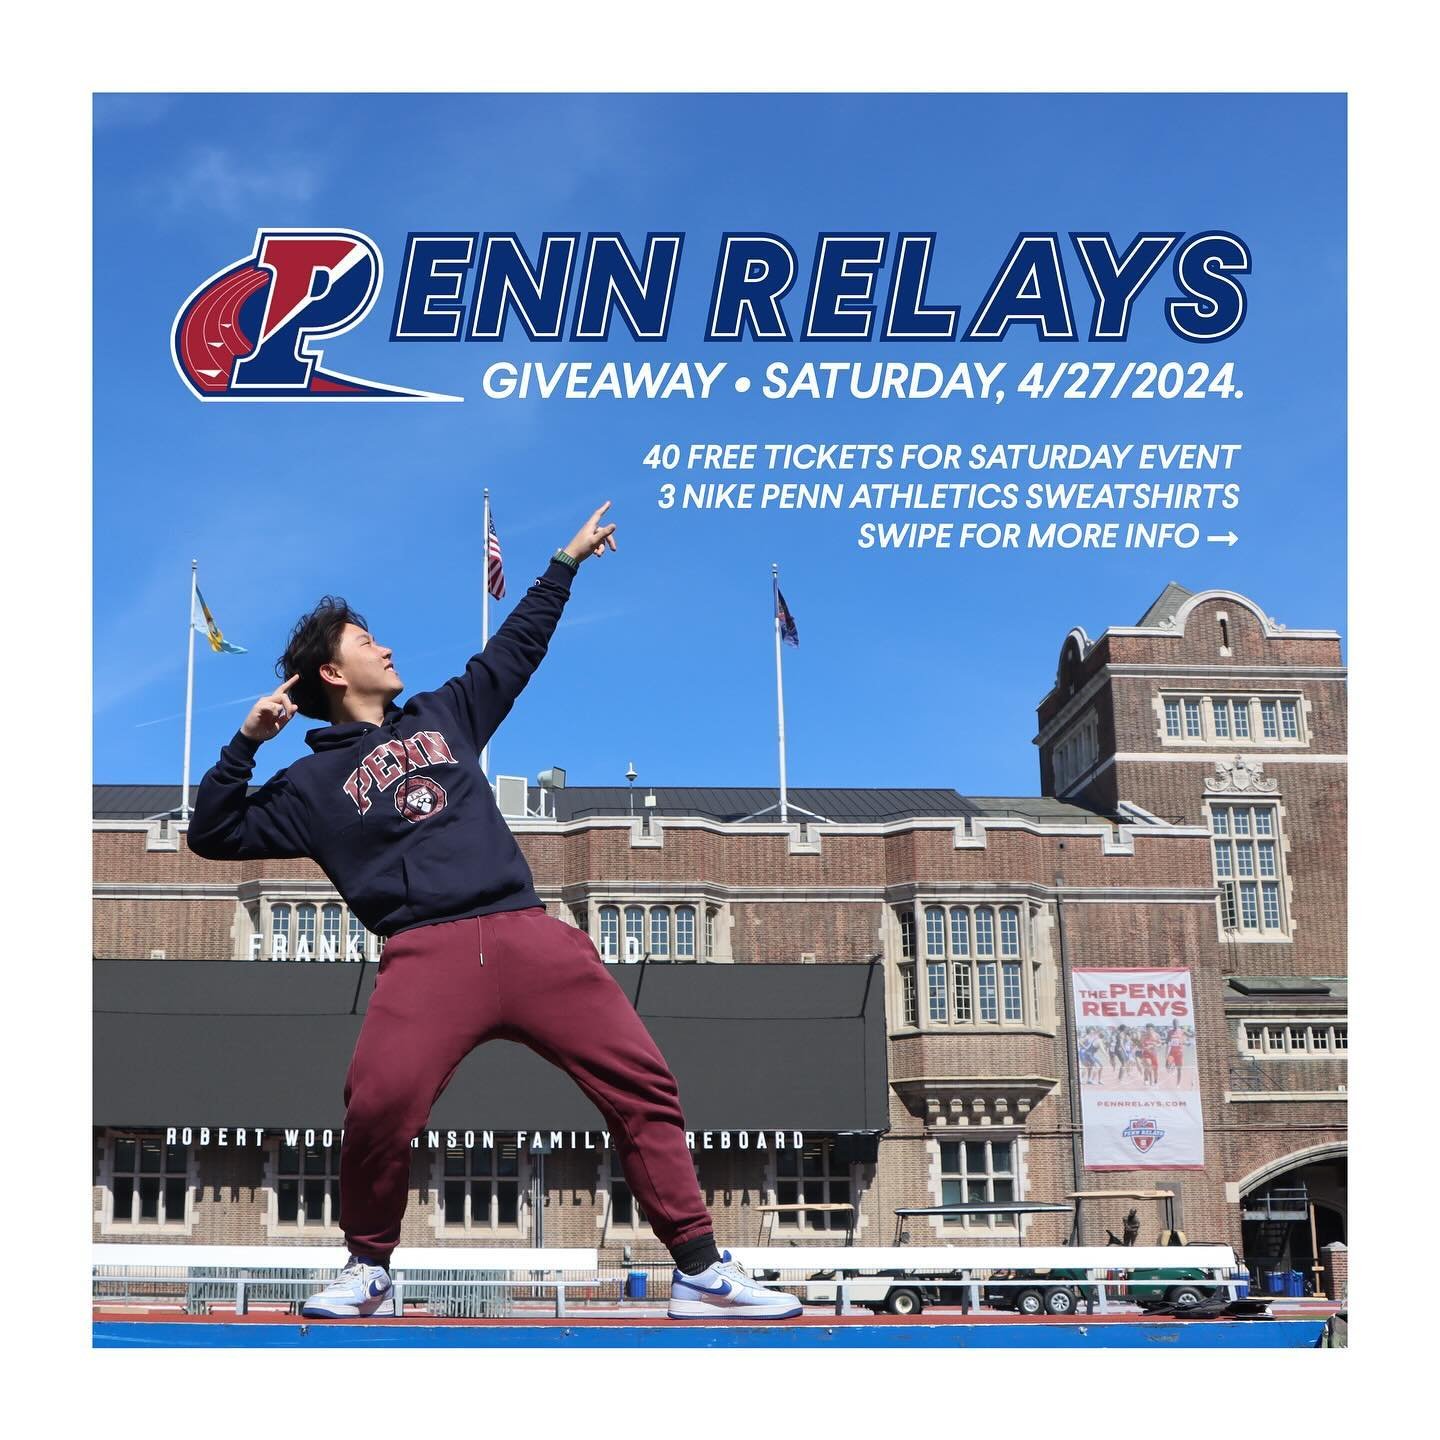 🏃&zwj;♂️ On your mark, get set, GO!!! 🏃&zwj;♂️&zwj;➡️

CB &rsquo;27 is excited to partner with Penn Athletics and Penn Relays to offer 40 FREE tickets to Penn Relays on Saturday AND 3 Nike Penn Sweaters.

To Enter into the Giveaway:
1. Follow @upen